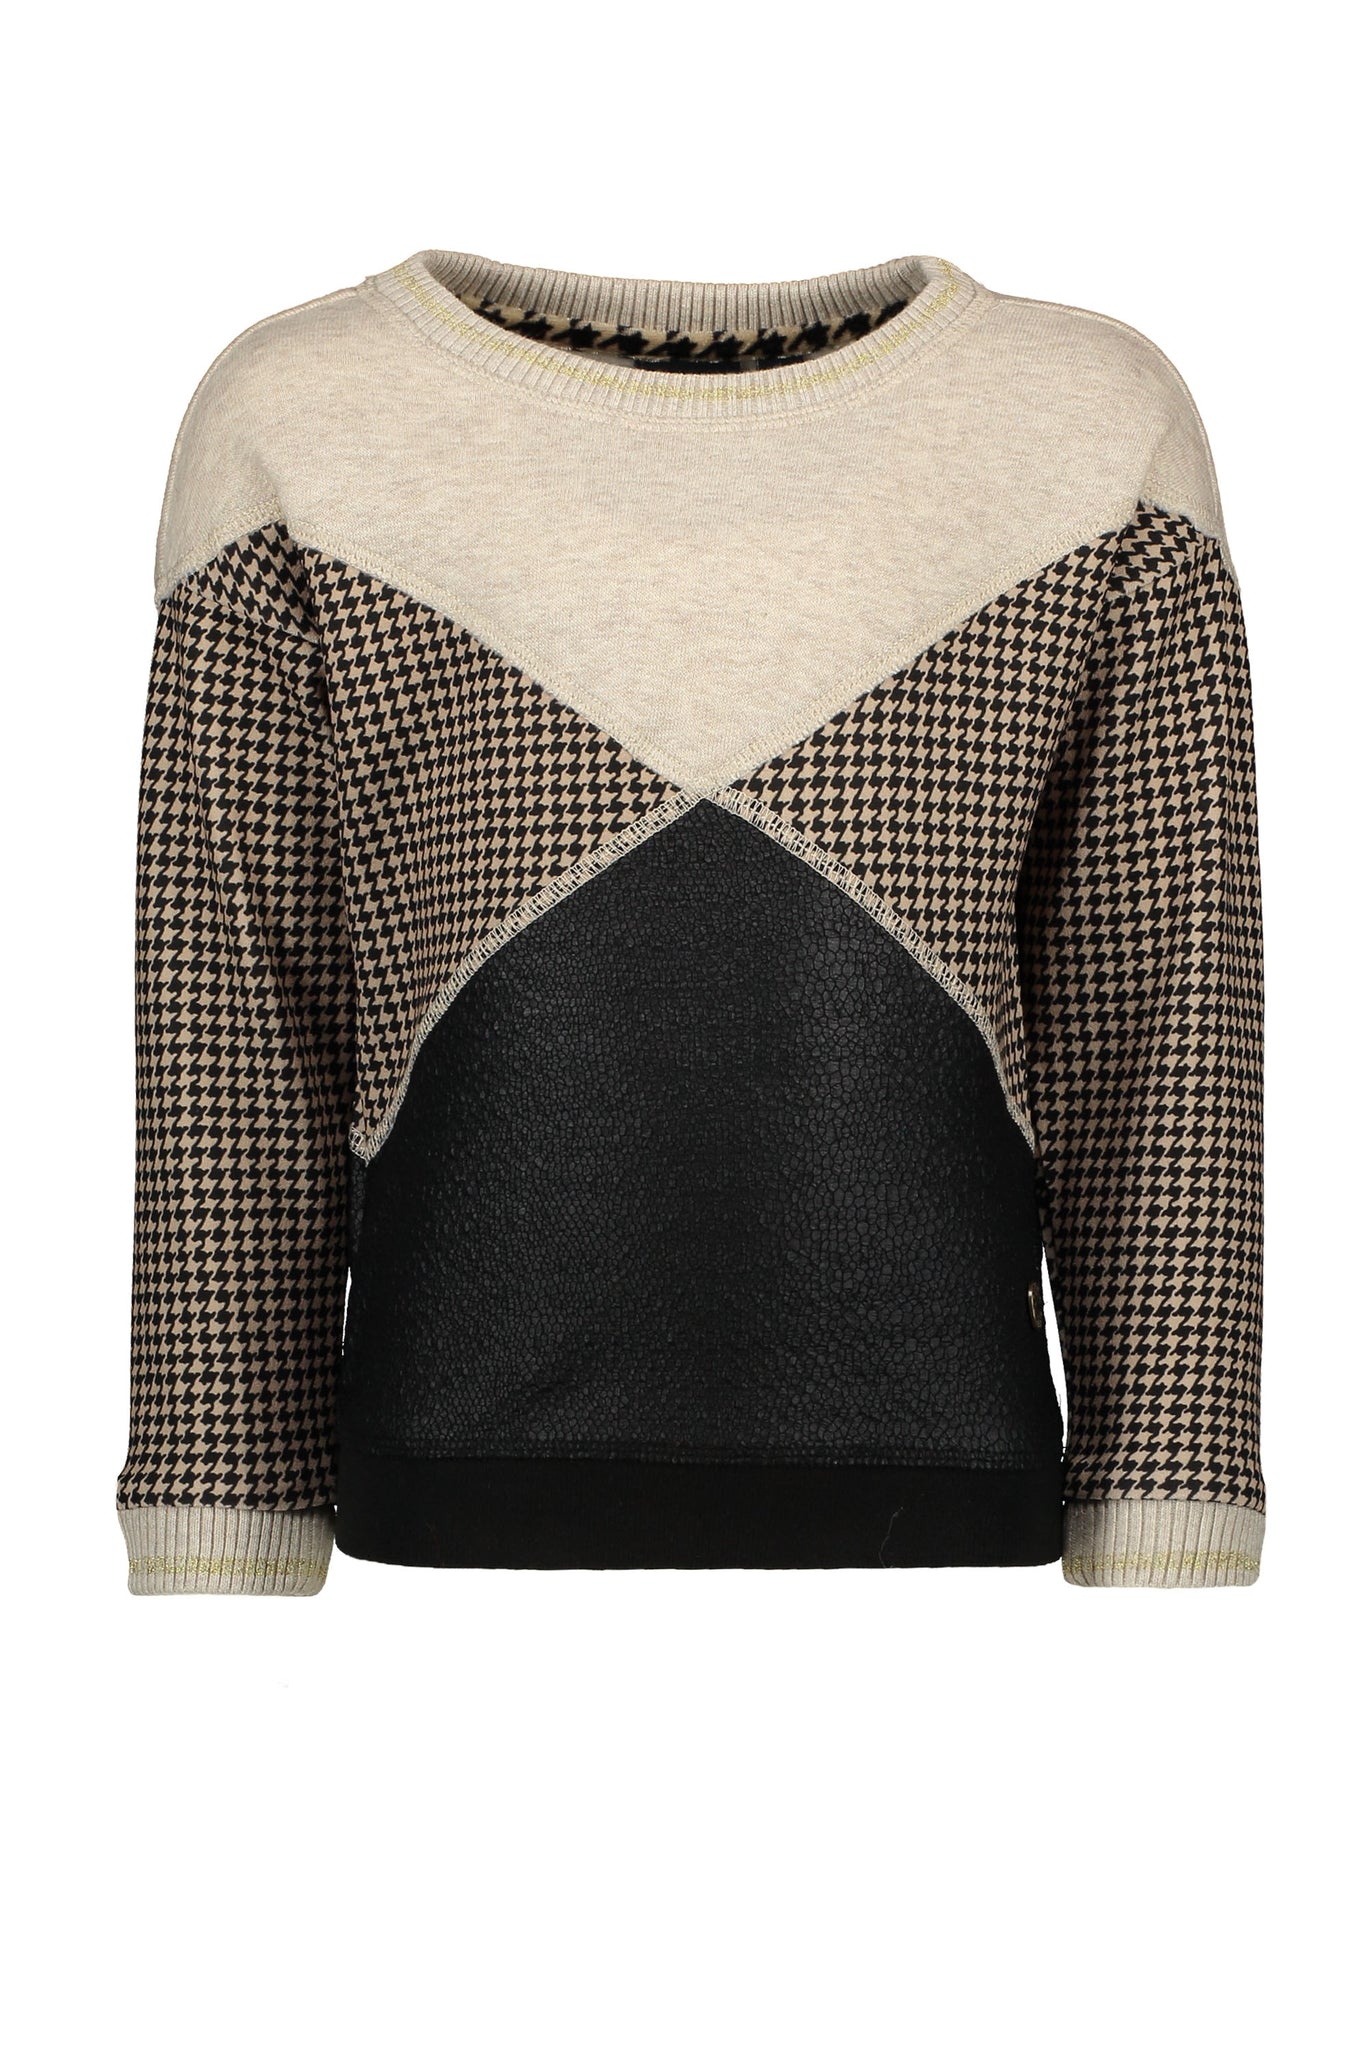 FLO Girls Houndstooth Colorblock Sweater